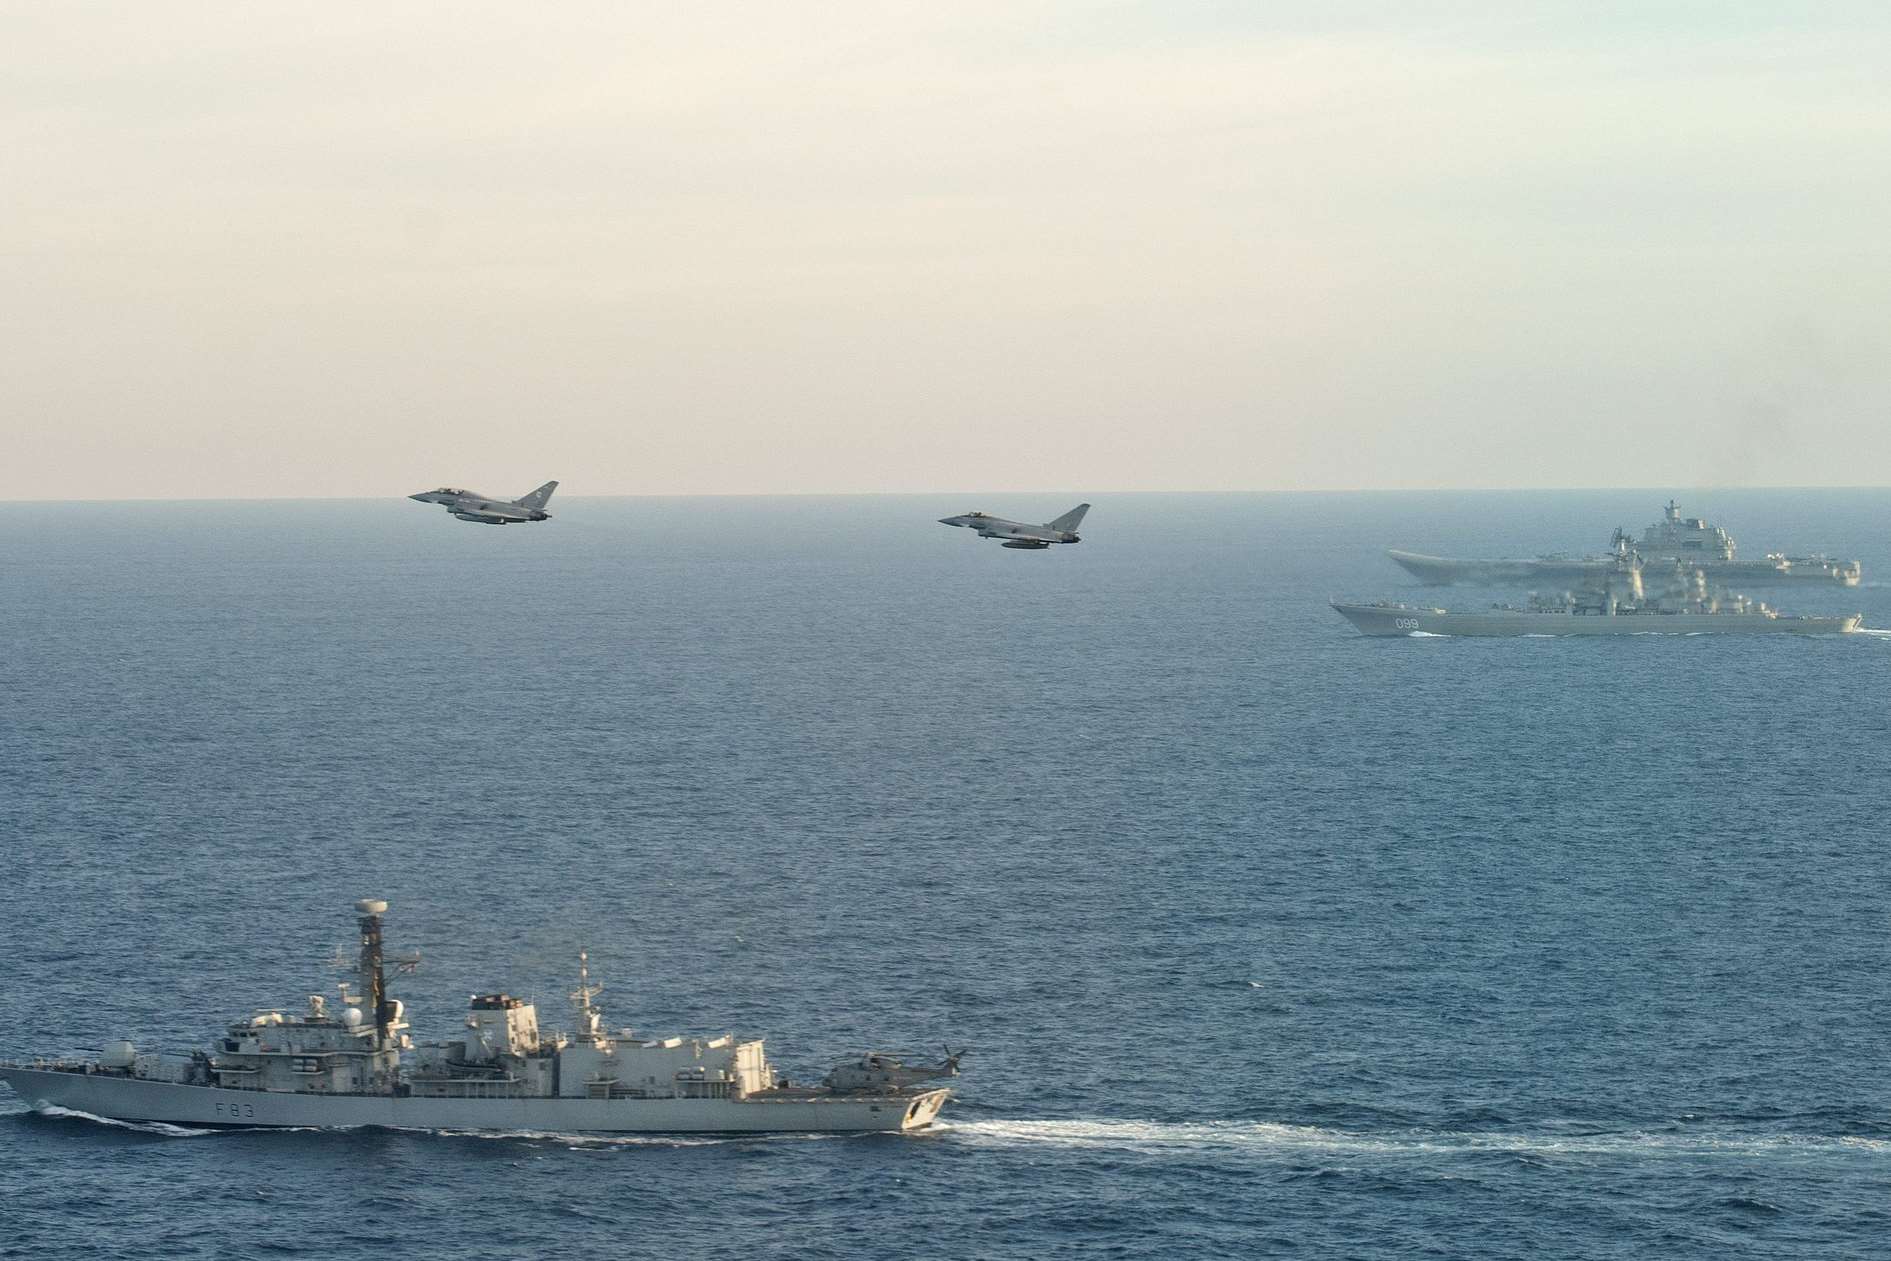 Defence secretary Sir Michael Fallon said HMS St Albans (foreground) was escorting the "skulking" Russian carrier and her task group. Picture: MoD/Royal Navy